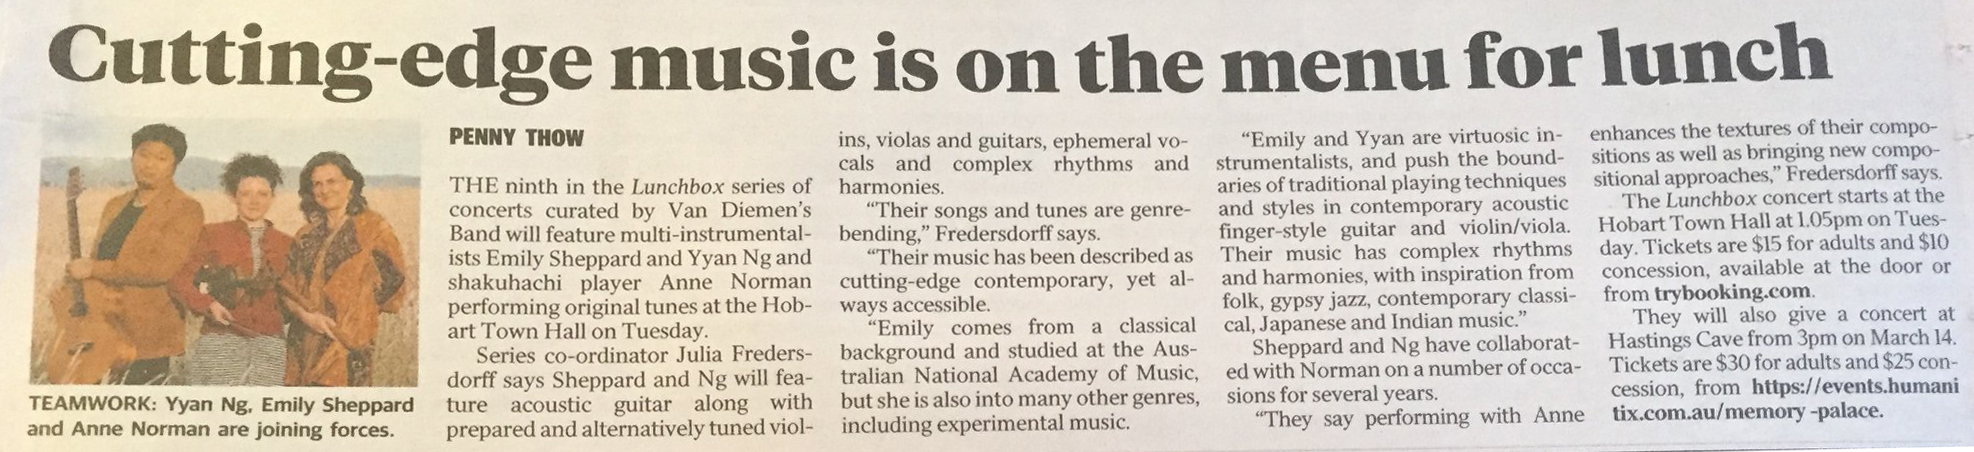 Newspaper clipping "Cutting Edge music" from a rag in Hobart